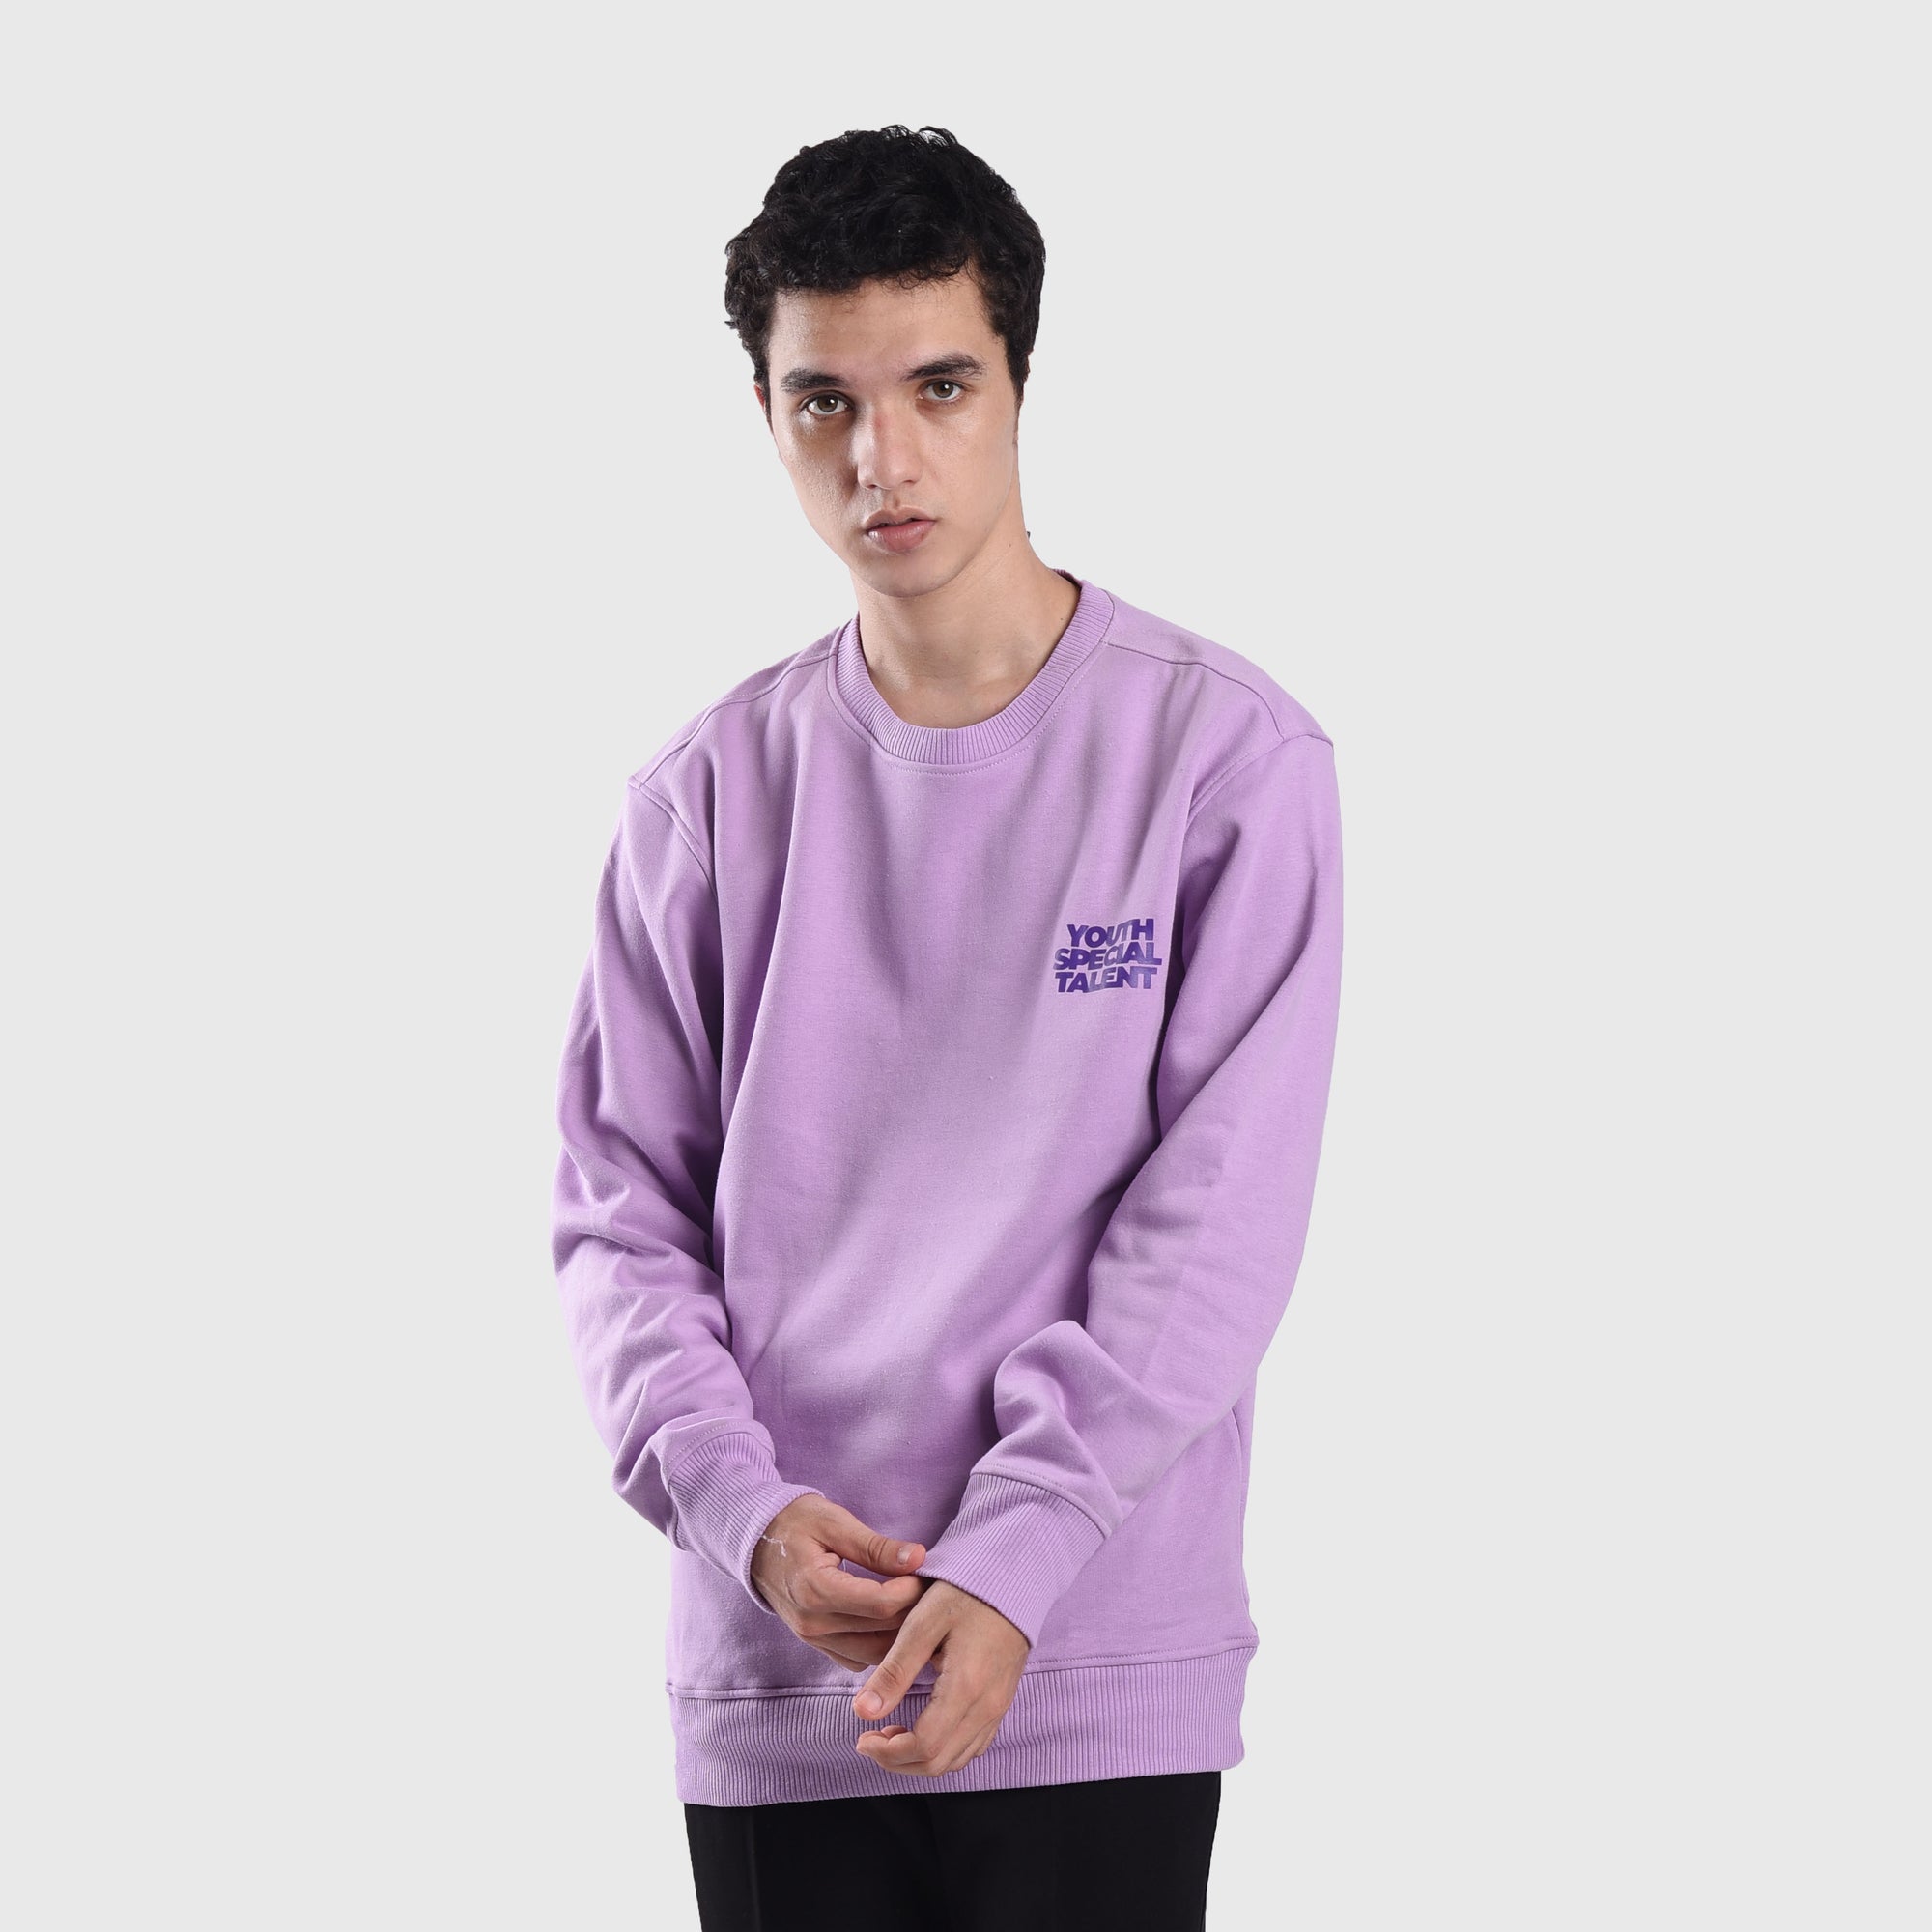 SS493 Lilac Youth Talent Crewneck